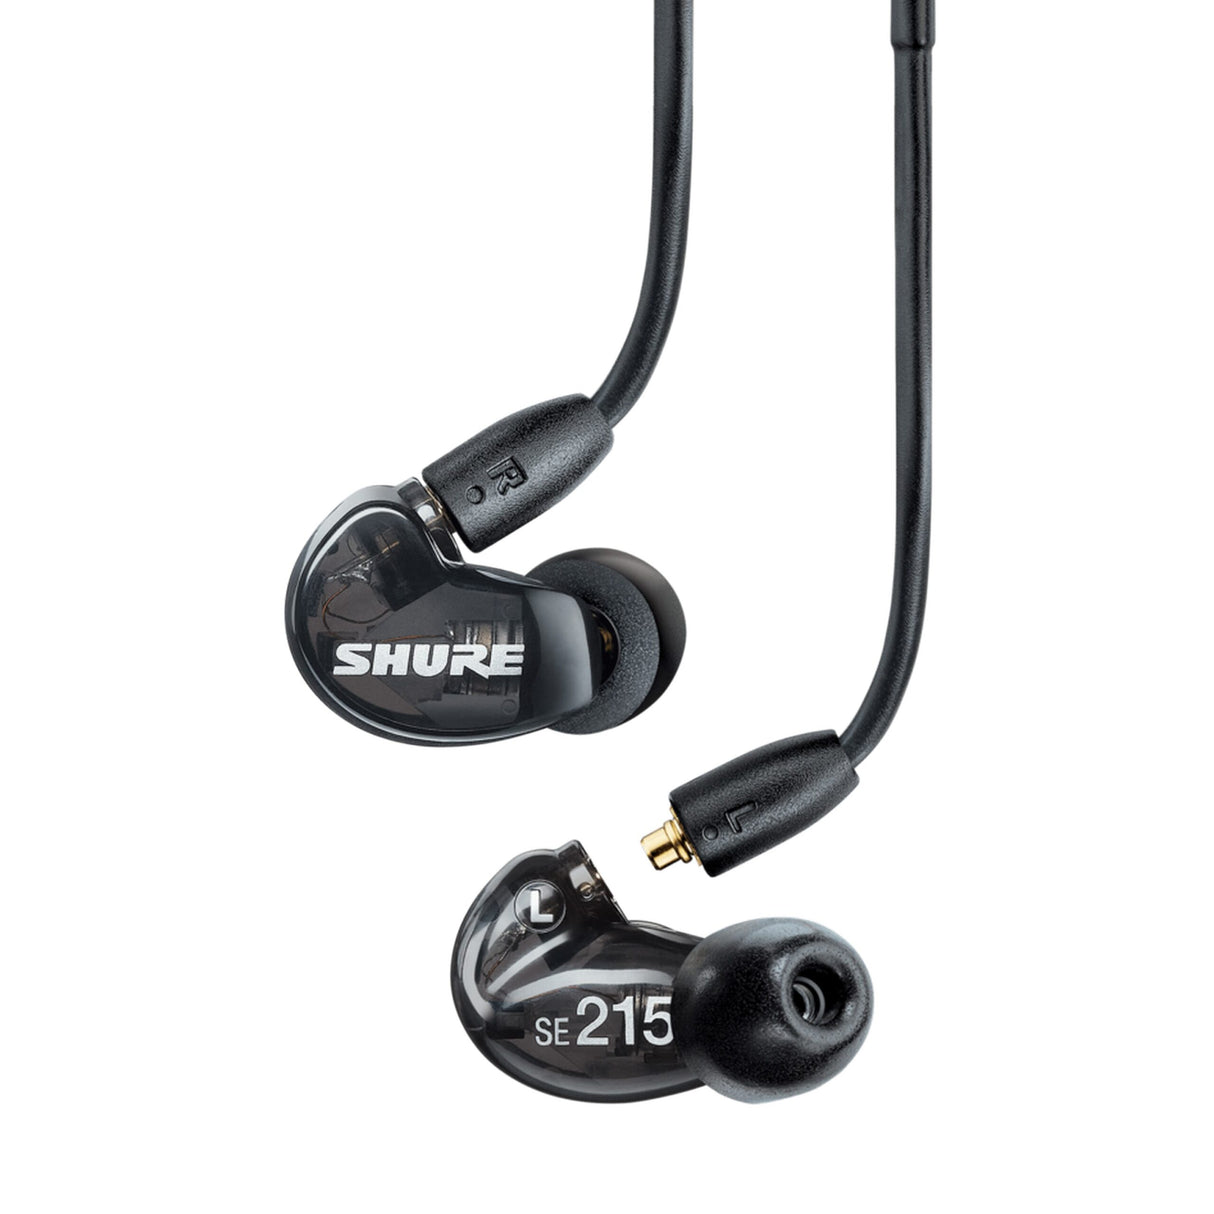 Shure AONIC 215 SE215DYBK+UNI Wired Sound Isolating In-Ear Headphone, Black